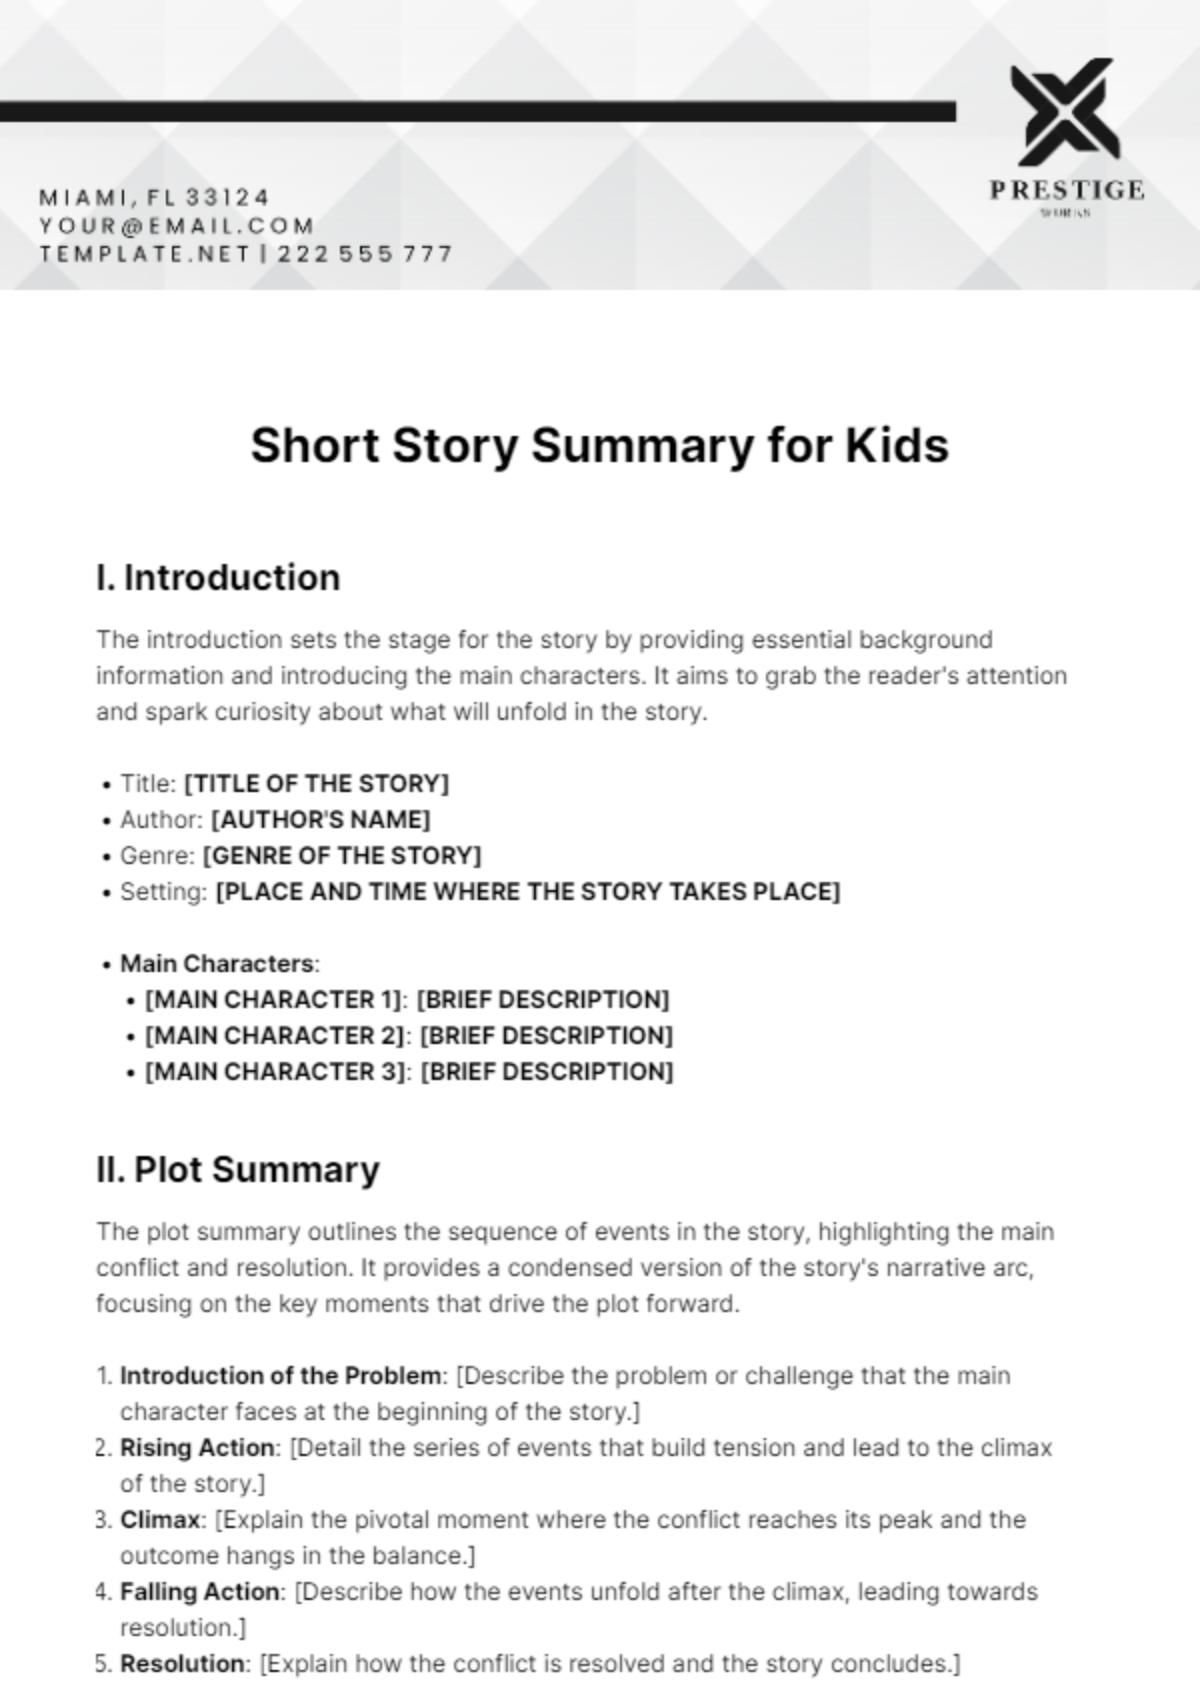 Short Story Summary for Kids Template